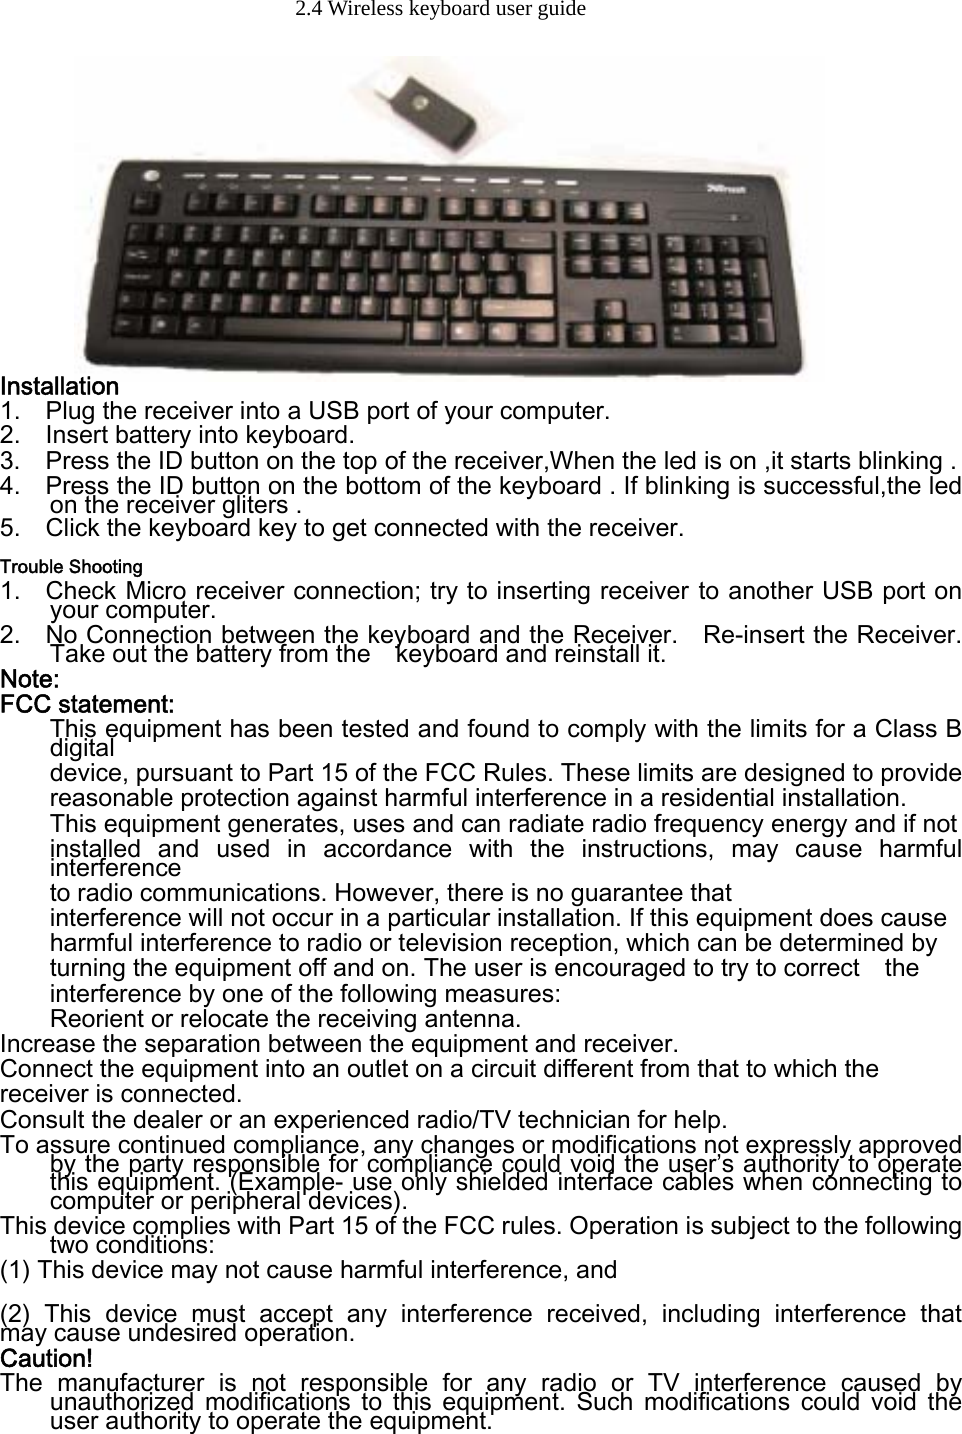 2.4 Wireless keyboard user guide                Installation 1.    Plug the receiver into a USB port of your computer. 2.    Insert battery into keyboard.   3.   Press the ID button on the top of the receiver,When the led is on ,it starts blinking . 4.    Press the ID button on the bottom of the keyboard . If blinking is successful,the led on the receiver gliters . 5.    Click the keyboard key to get connected with the receiver.   Trouble Shooting 1.    Check Micro receiver connection; try to inserting receiver to another USB port on your computer. 2.    No Connection between the keyboard and the Receiver.    Re-insert the Receiver. Take out the battery from the    keyboard and reinstall it.     Note: FCC statement: This equipment has been tested and found to comply with the limits for a Class B digital   device, pursuant to Part 15 of the FCC Rules. These limits are designed to provide   reasonable protection against harmful interference in a residential installation. This equipment generates, uses and can radiate radio frequency energy and if not   installed  and  used  in  accordance  with  the  instructions,  may  cause  harmful interference   to radio communications. However, there is no guarantee that   interference will not occur in a particular installation. If this equipment does cause   harmful interference to radio or television reception, which can be determined by   turning the equipment off and on. The user is encouraged to try to correct    the interference by one of the following measures: Reorient or relocate the receiving antenna. Increase the separation between the equipment and receiver. Connect the equipment into an outlet on a circuit different from that to which the   receiver is connected. Consult the dealer or an experienced radio/TV technician for help. To assure continued compliance, any changes or modifications not expressly approved by the party responsible for compliance could void the user’s authority to operate this equipment. (Example- use only shielded interface cables when connecting to computer or peripheral devices). This device complies with Part 15 of the FCC rules. Operation is subject to the following two conditions: (1) This device may not cause harmful interference, and  (2)  This  device  must  accept  any  interference  received,  including interference that    may cause undesired operation.   Caution! The  manufacturer  is  not  responsible  for  any  radio  or  TV  interference  caused  by unauthorized  modifications  to  this  equipment.  Such  modifications  could  void  the user authority to operate the equipment. 